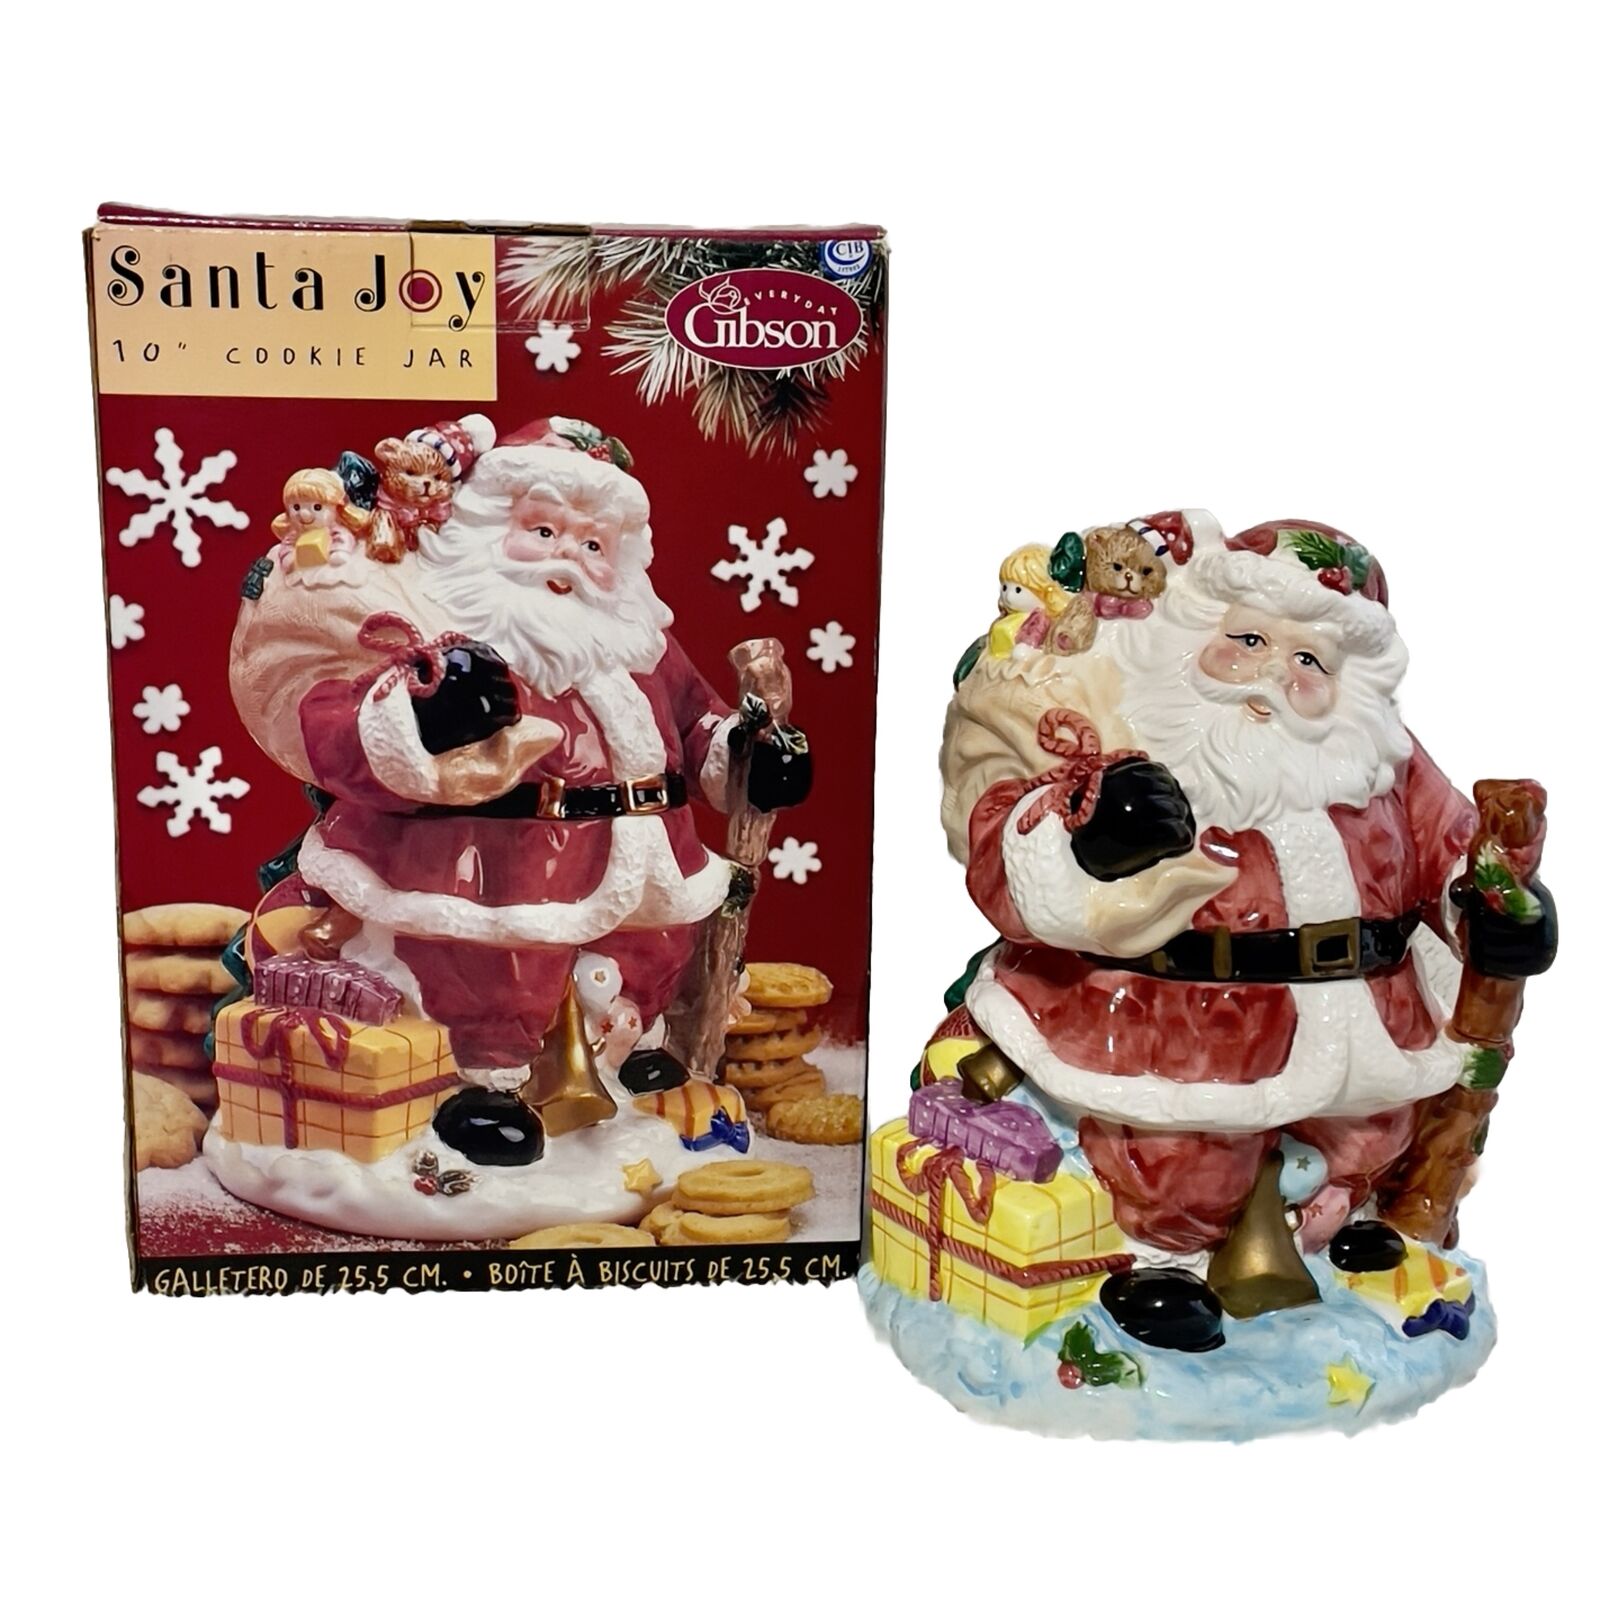 Vintage Gibson Christmas Cookie Jar Santa Claus with Toys Gifts 